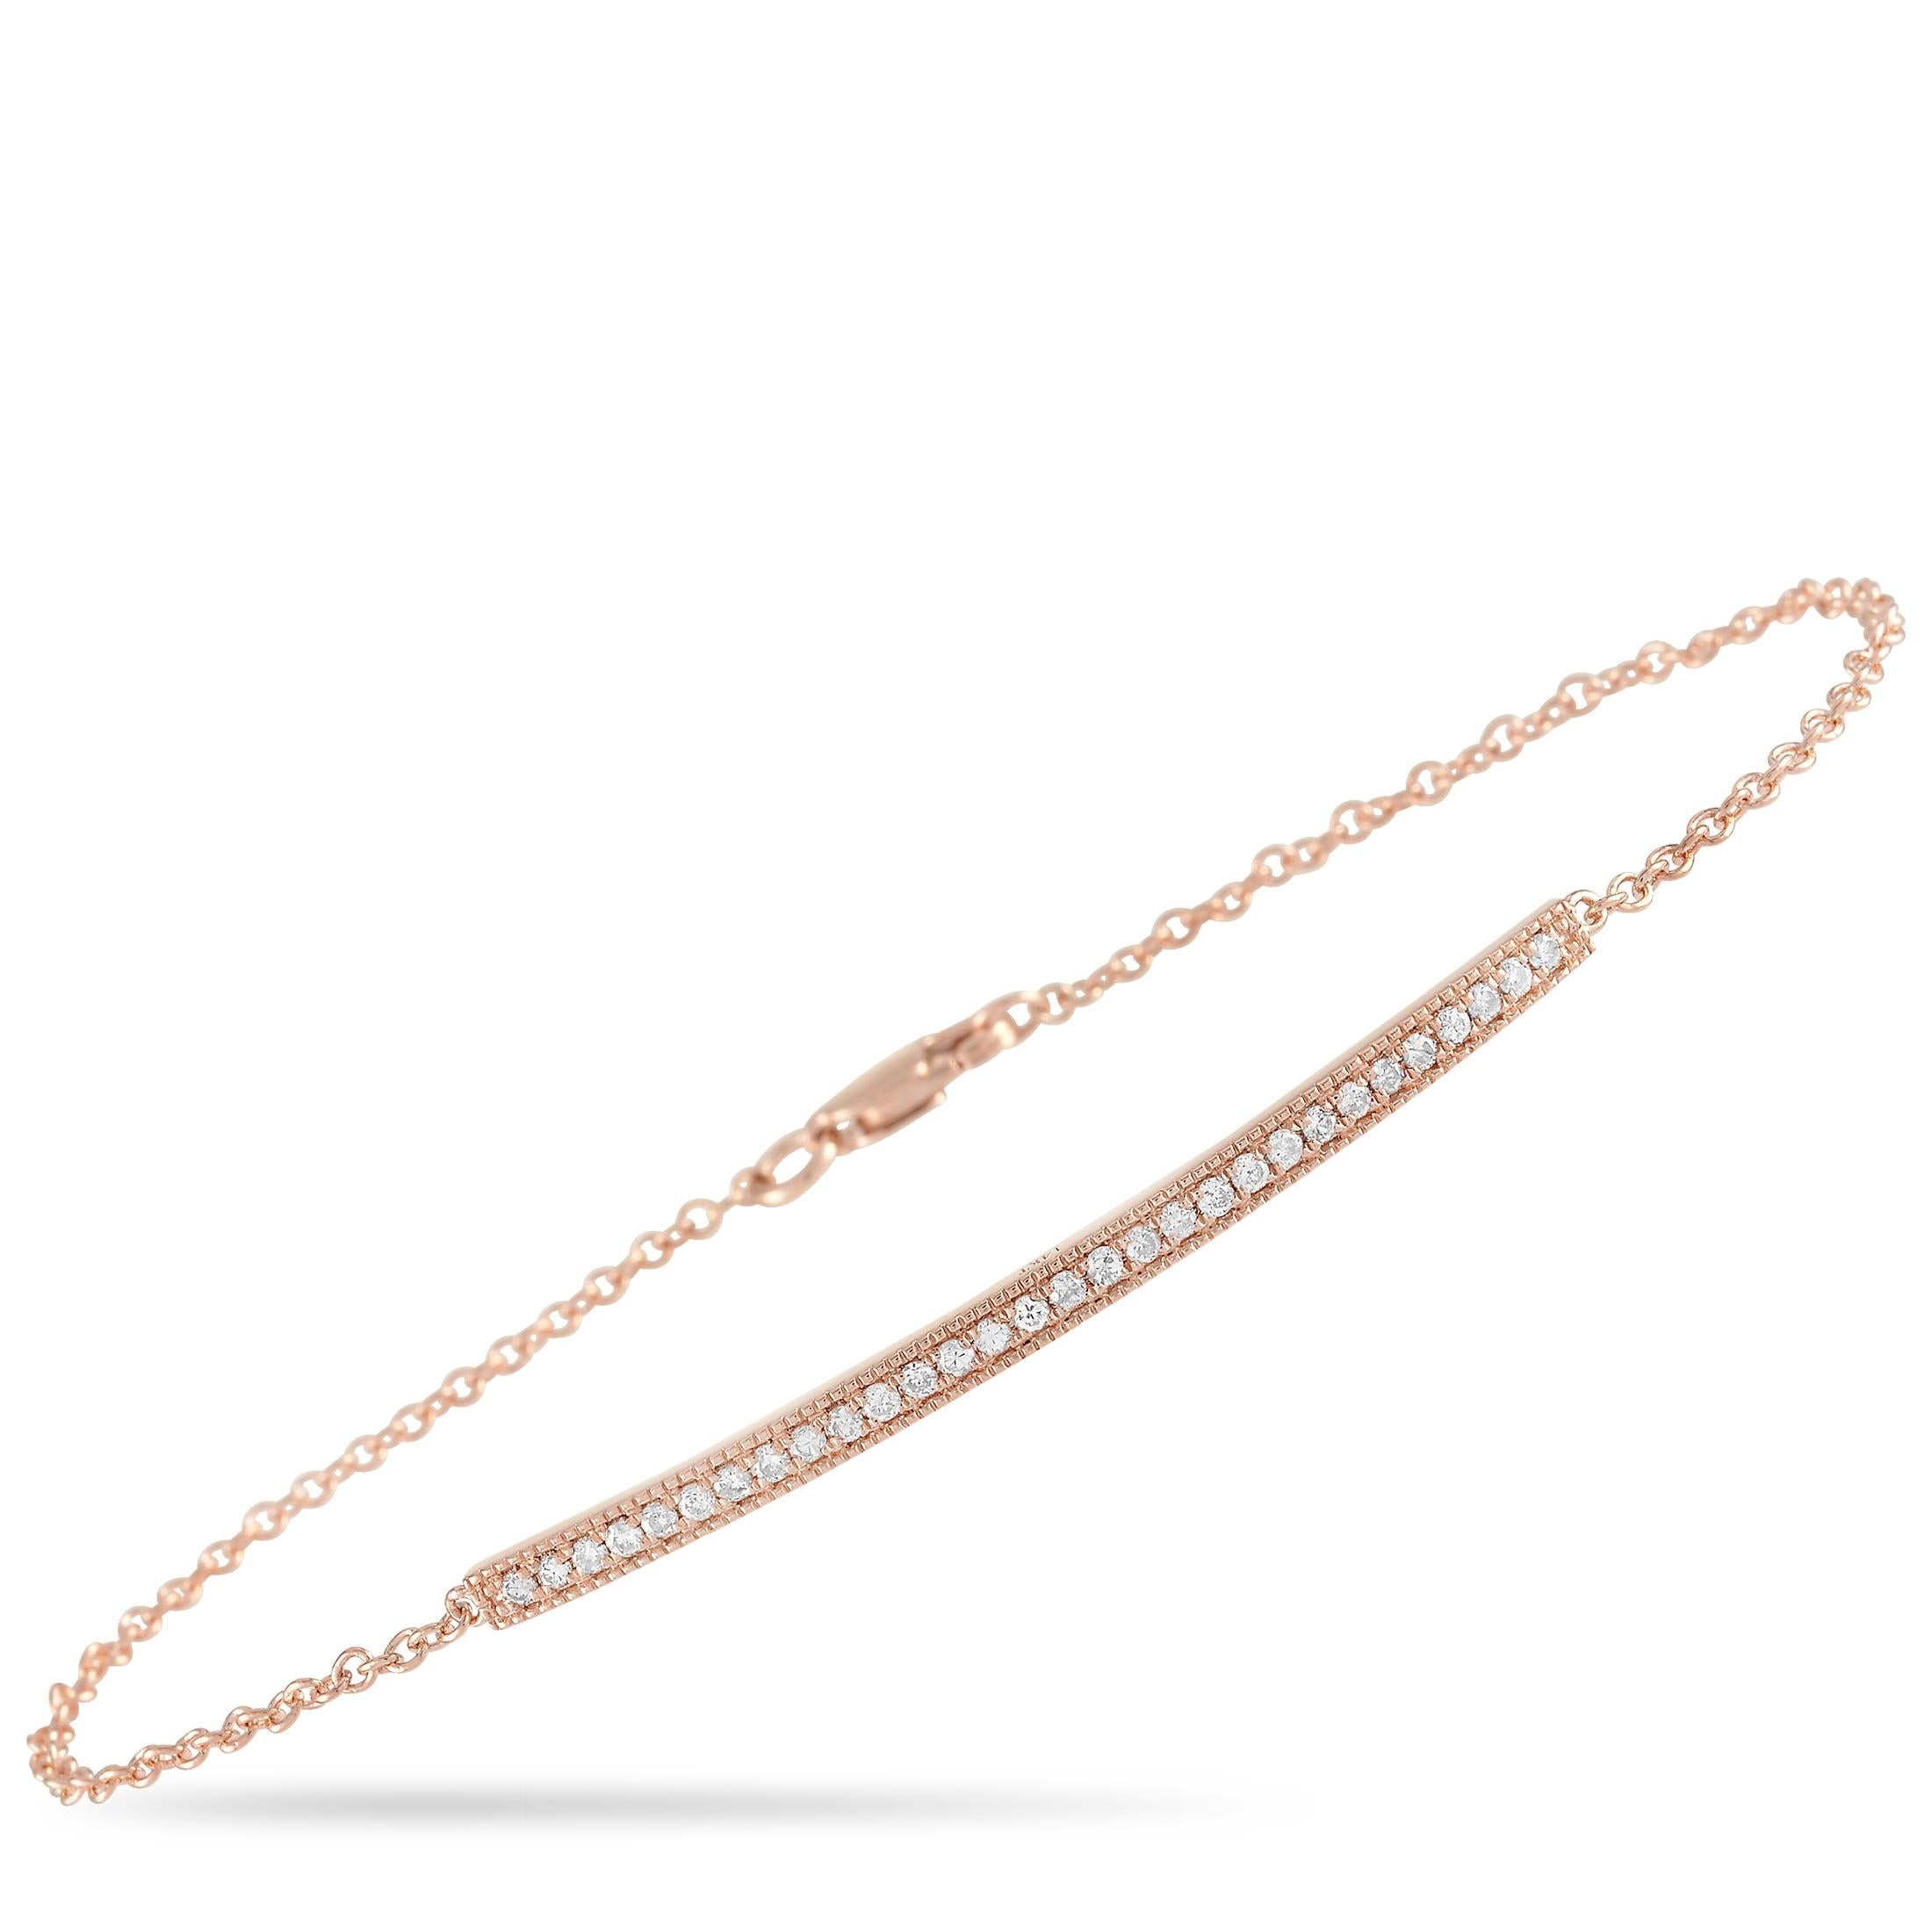 LB Exclusive 14k Rose Gold 0.25 Carat Diamond Bracelet In New Condition For Sale In Southampton, PA